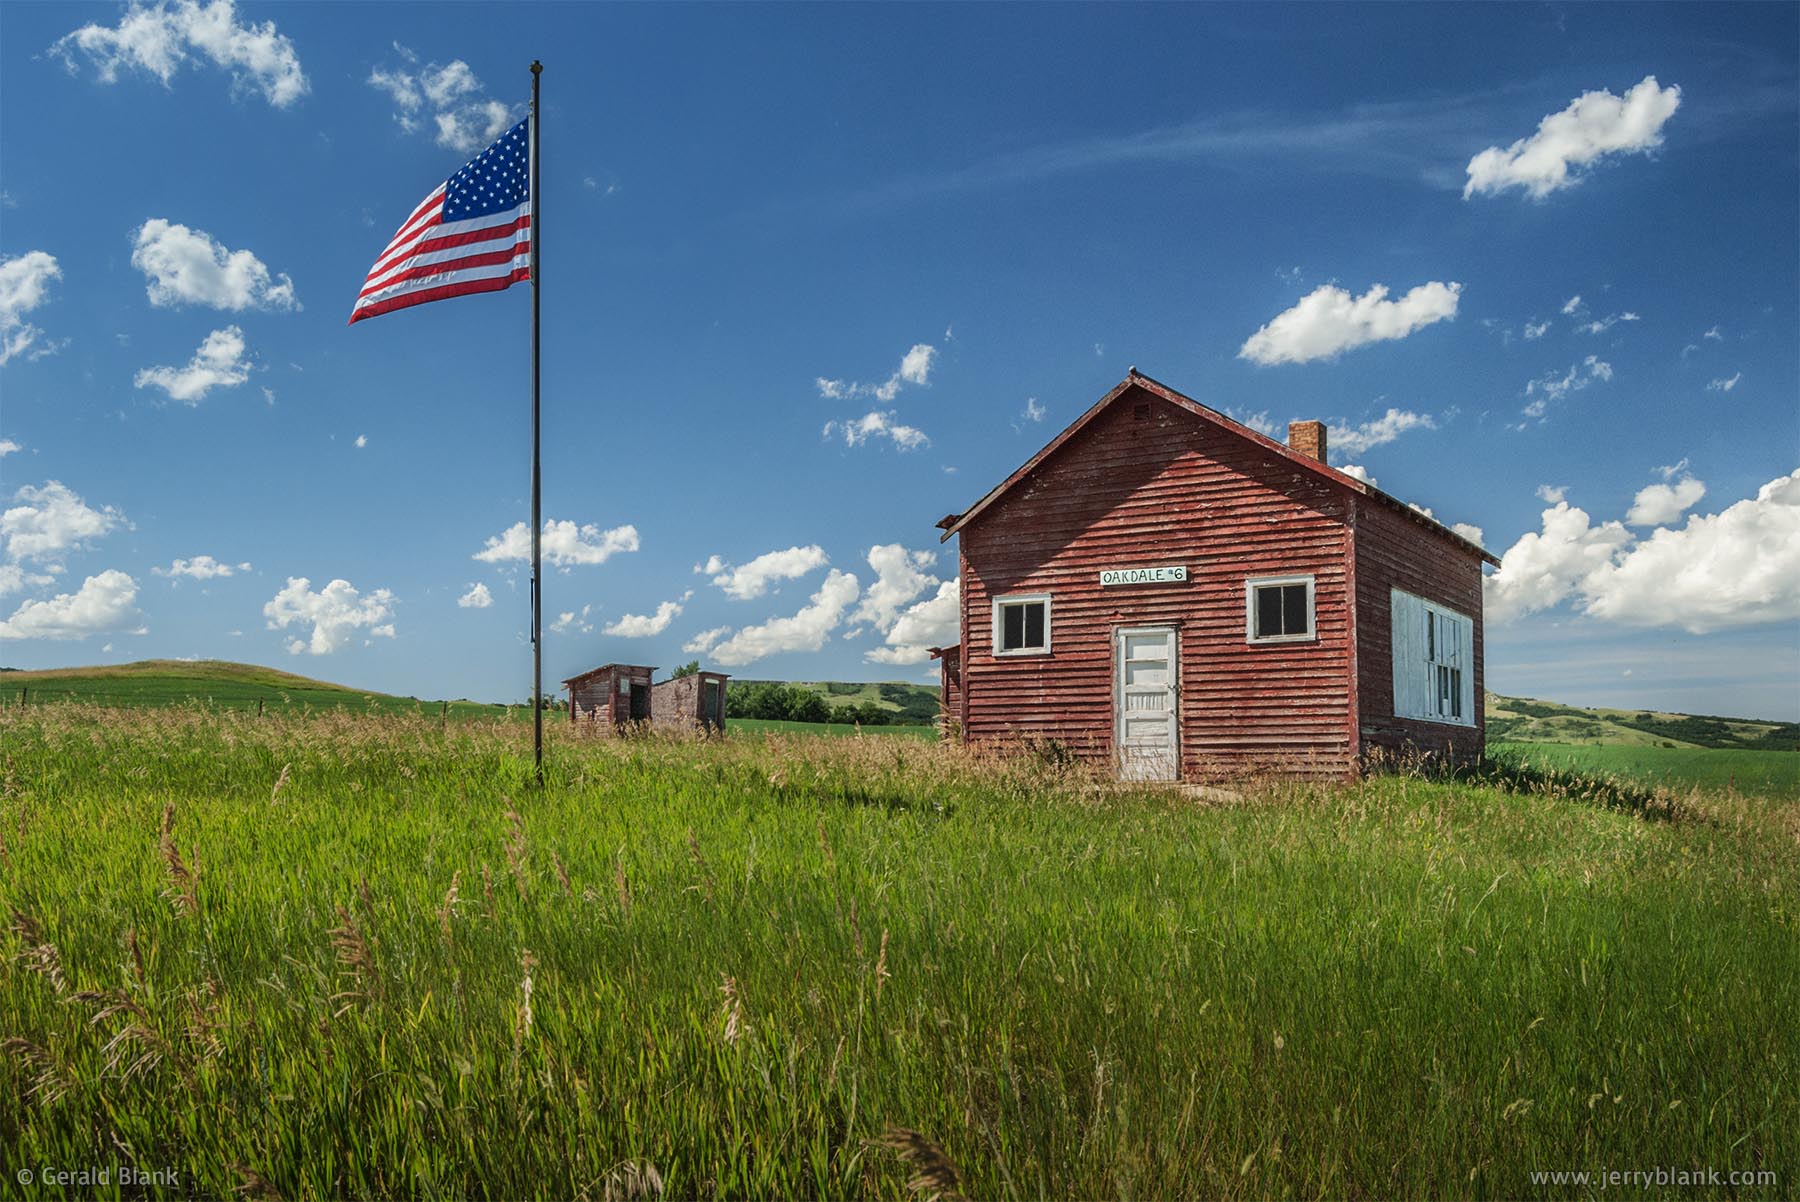 #01028 - On Independence Day, the U.S. flag is raised once again at the historic Oakdale School building in Dunn County, North Dakota - photo by Jerry Blank